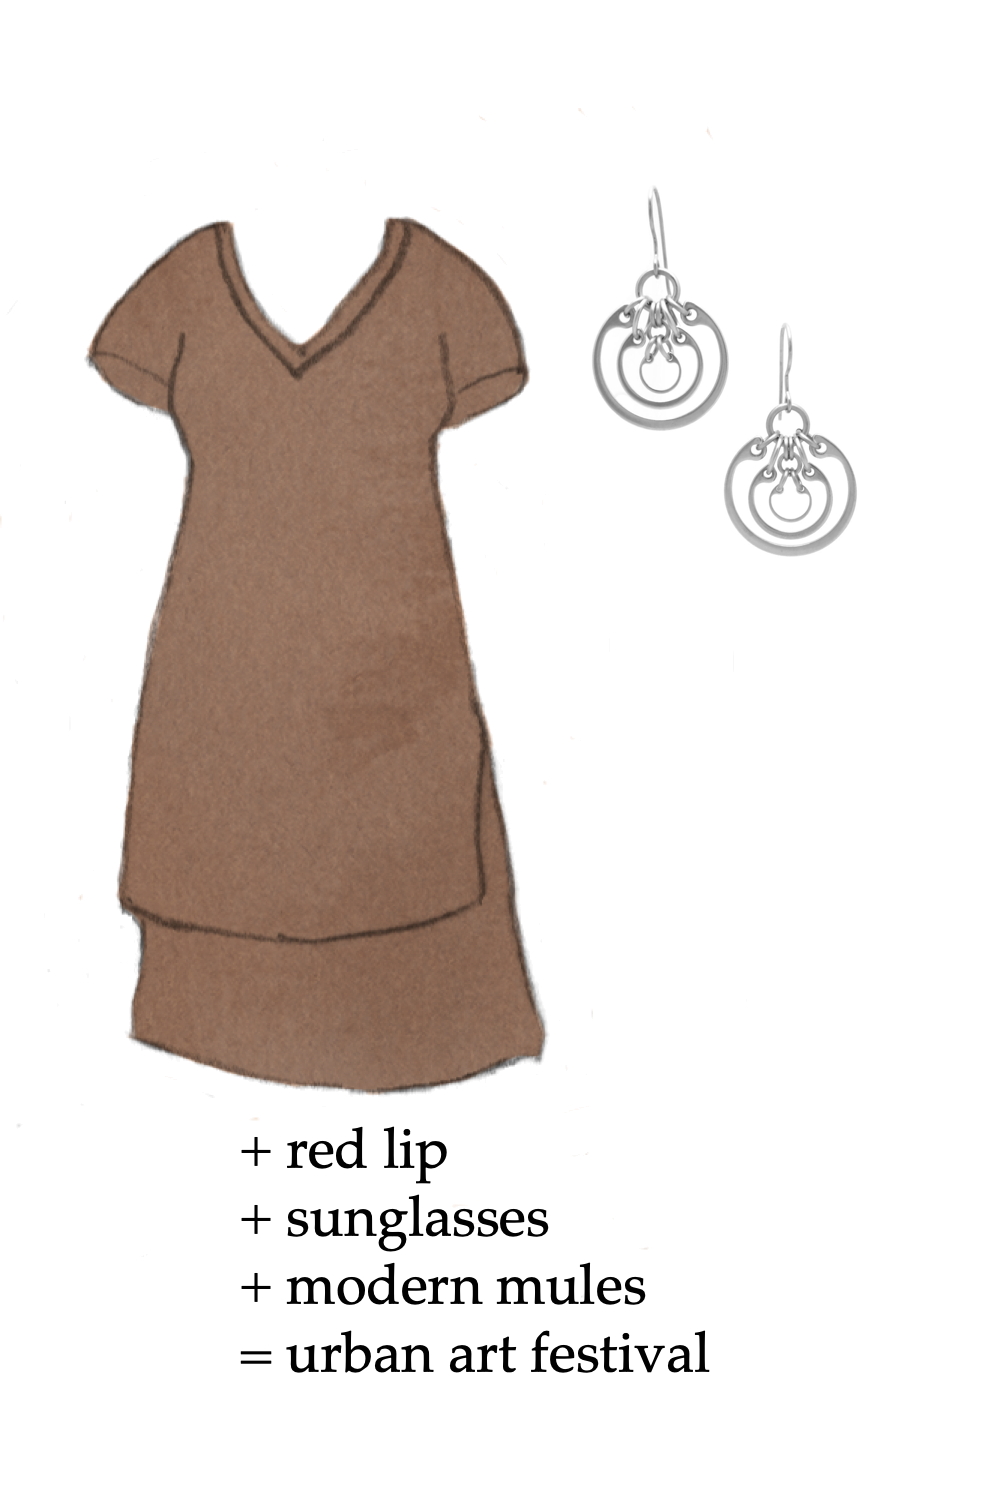 Outfit idea featuring a style sketch of the Tesino Washed Jersey Dress by Universal Standard in olive (brown) and the Small Concentric Earrings by Wraptillion. Text on image reads: + red lip + sunglasses + modern mules = urban art festival.